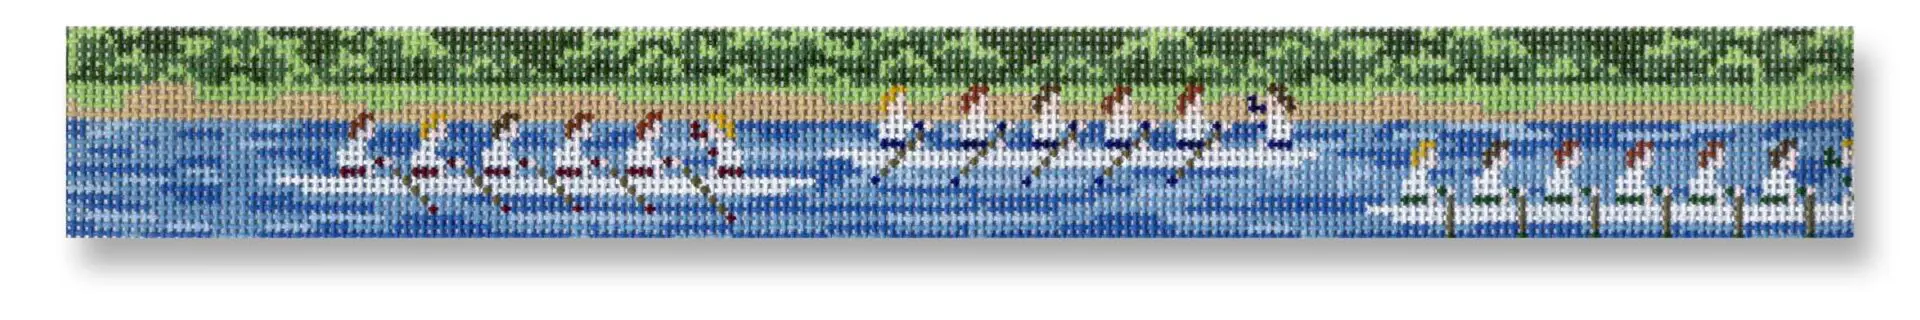 A cross stitch picture of boats on the water.